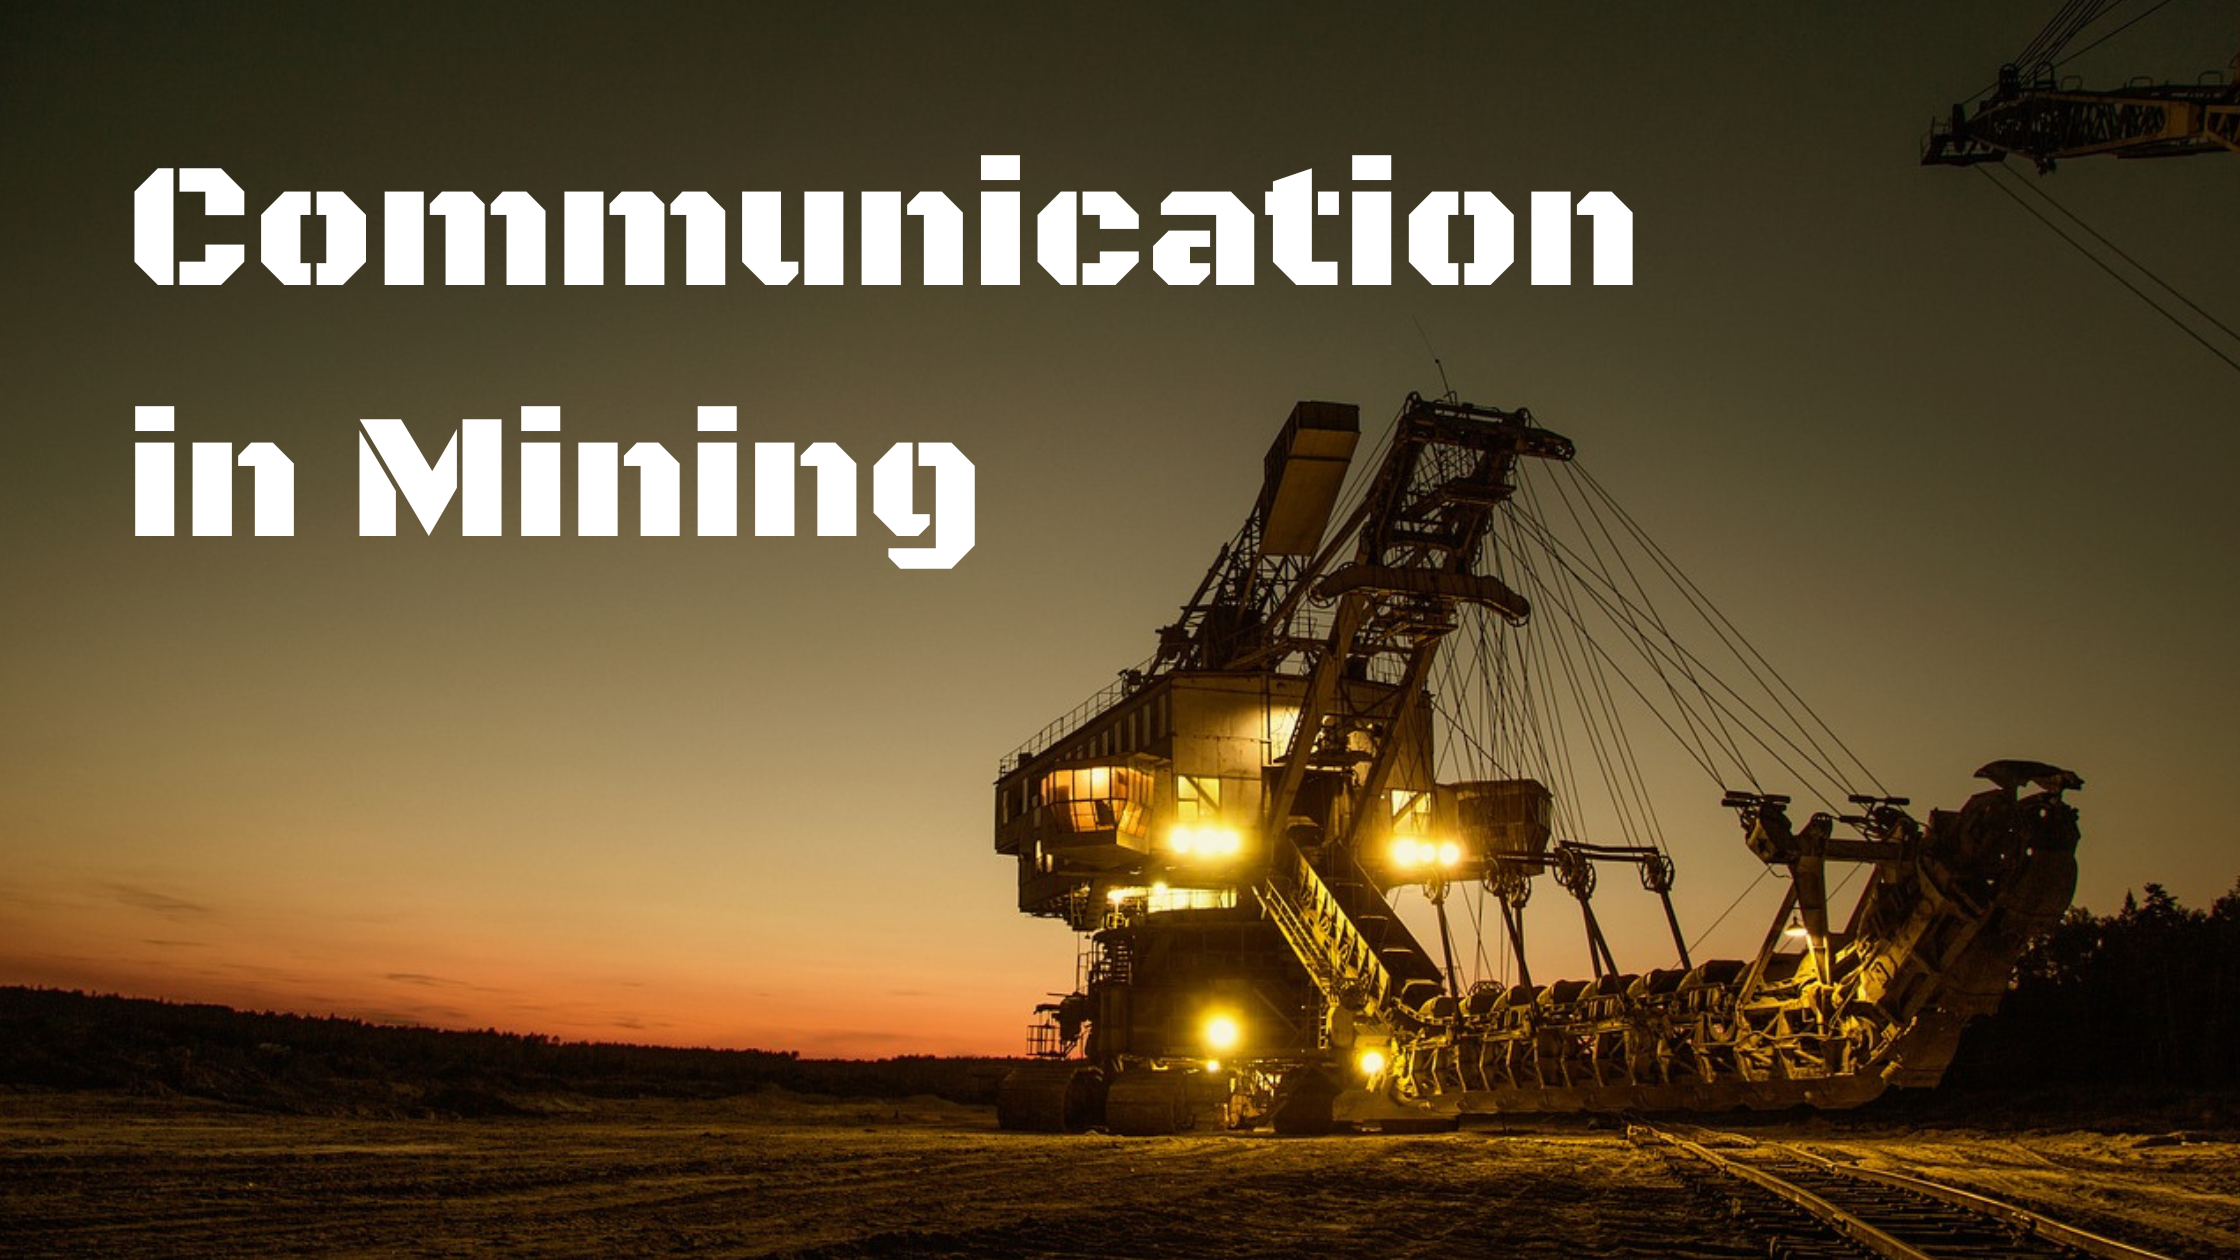 How do You Communicate in Mining?